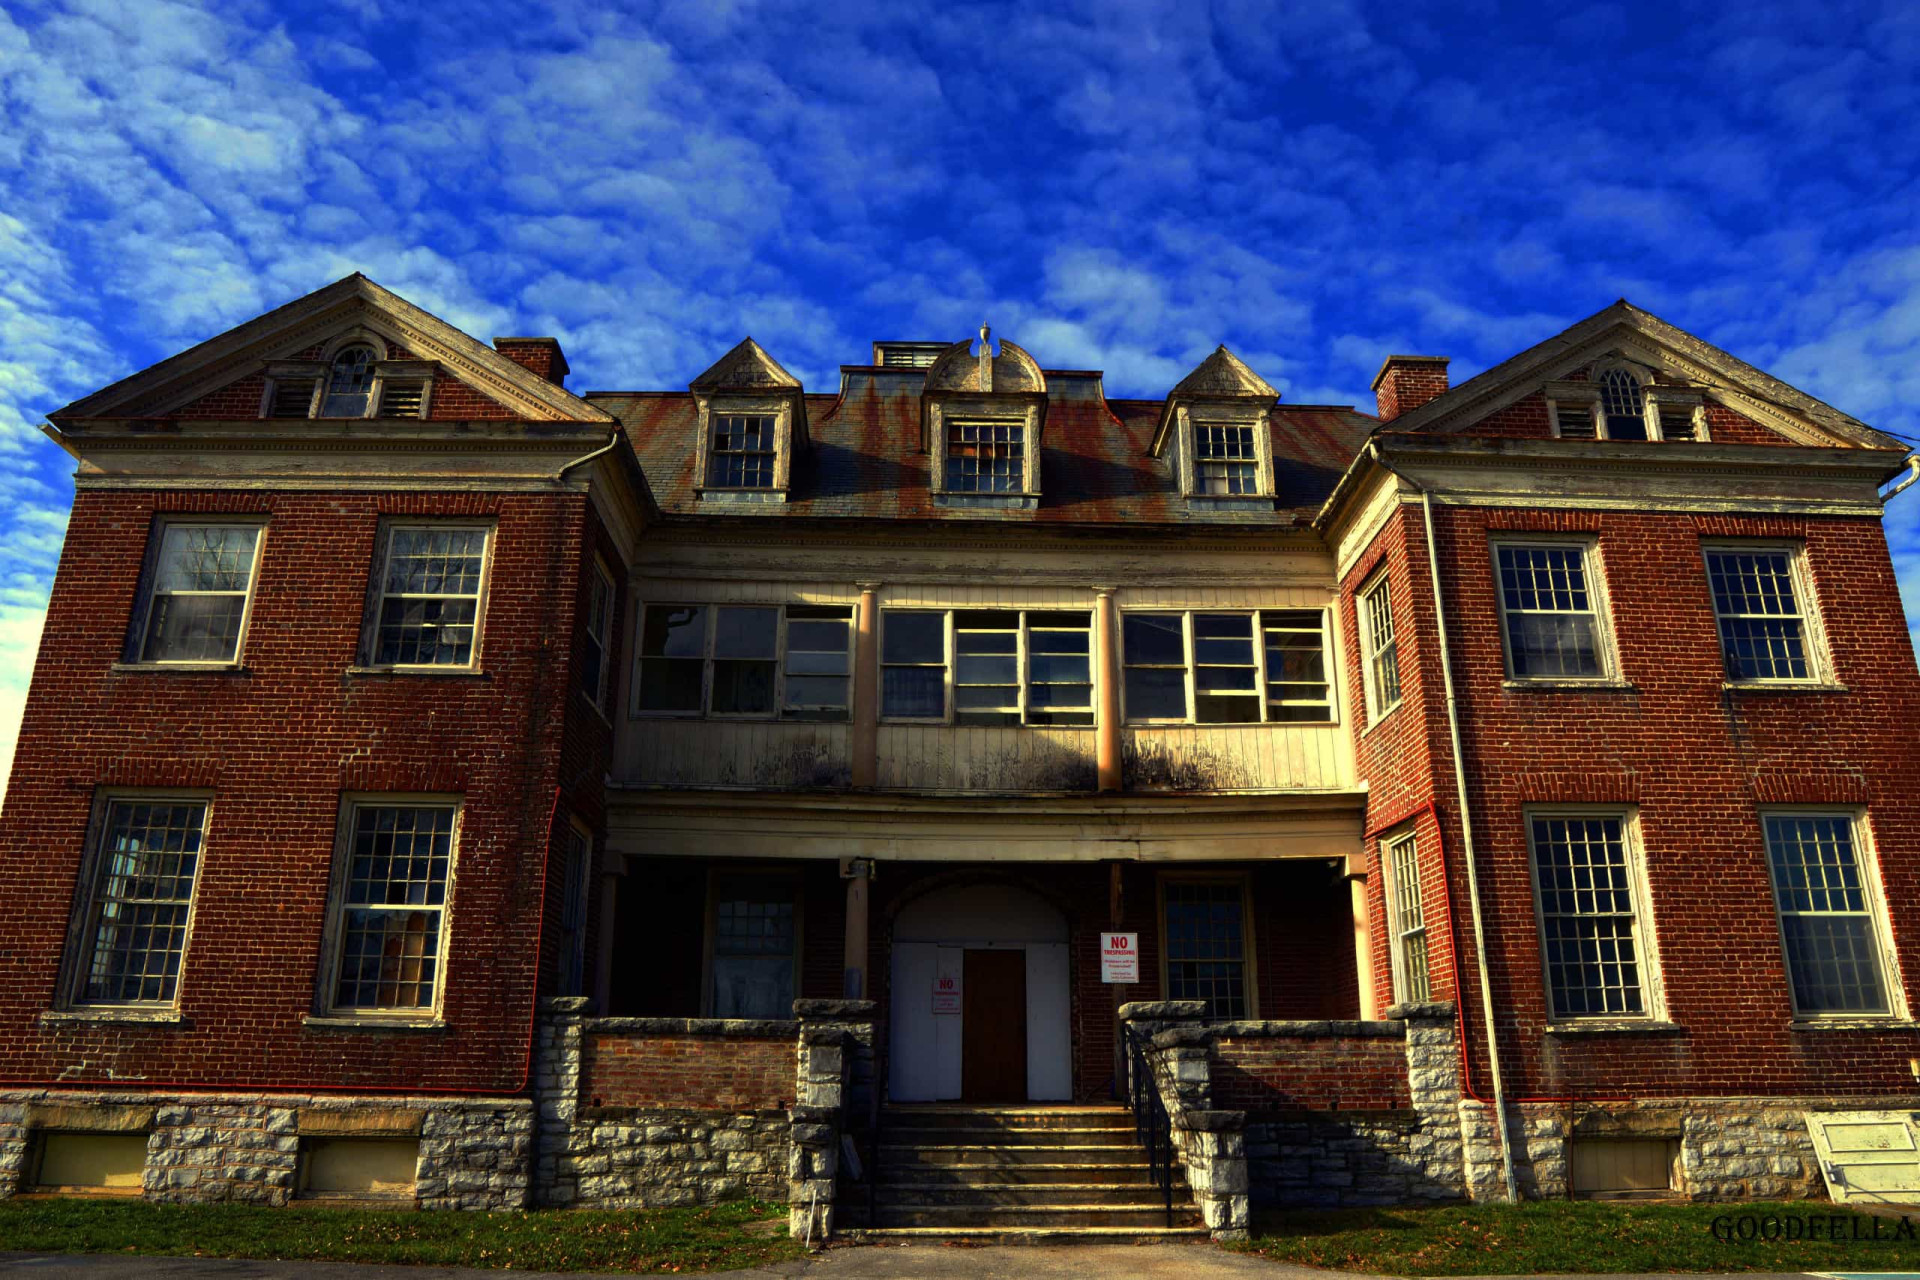 <p>Before becoming a mental institution, the St. Albans Sanatorium in Radford, was built as a Lutheran boys' school. Until it closed in the 1990s, various "treatments" were conducted there, including electroconvulsive therapy and lobotomies. Visitors have reported paranormal activity, including apparitions and floating objects. </p>